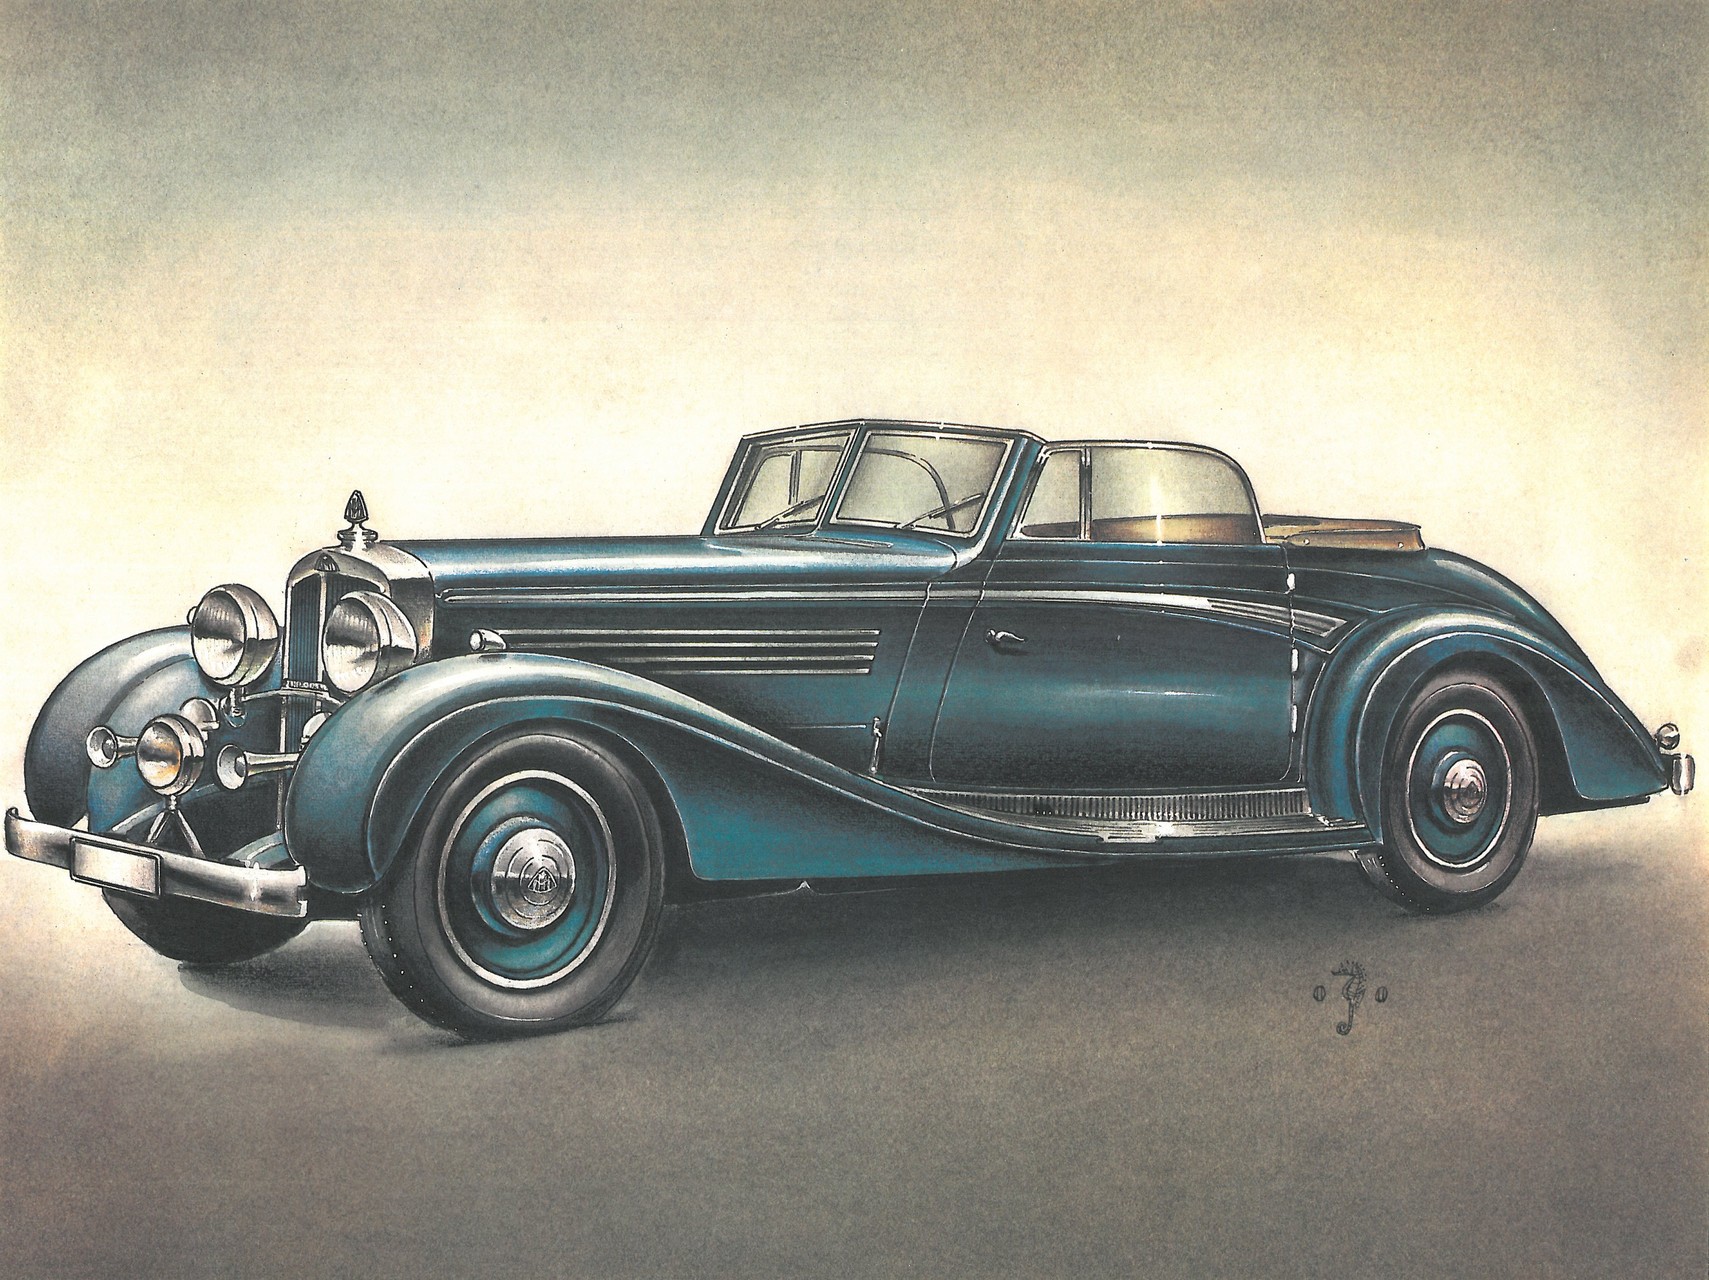 1938 Maybach DS8 Zeppelin Sport-Cabriolet: Illustrated by Piet Olyslager